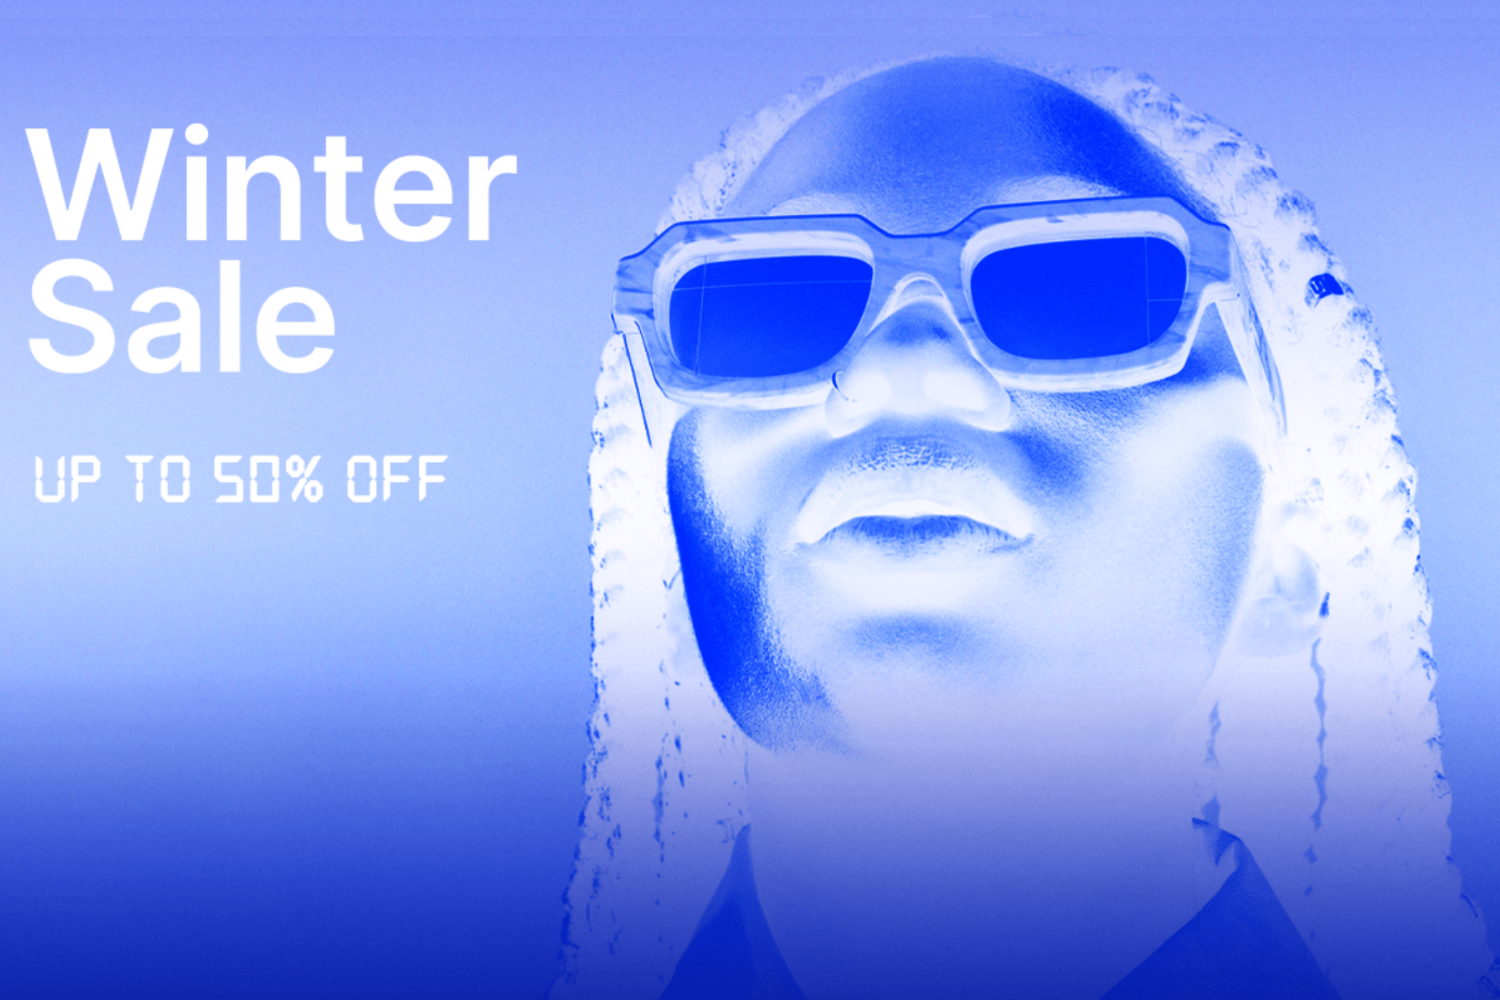 Save up to 50% with Footdistrict's Winter Sale